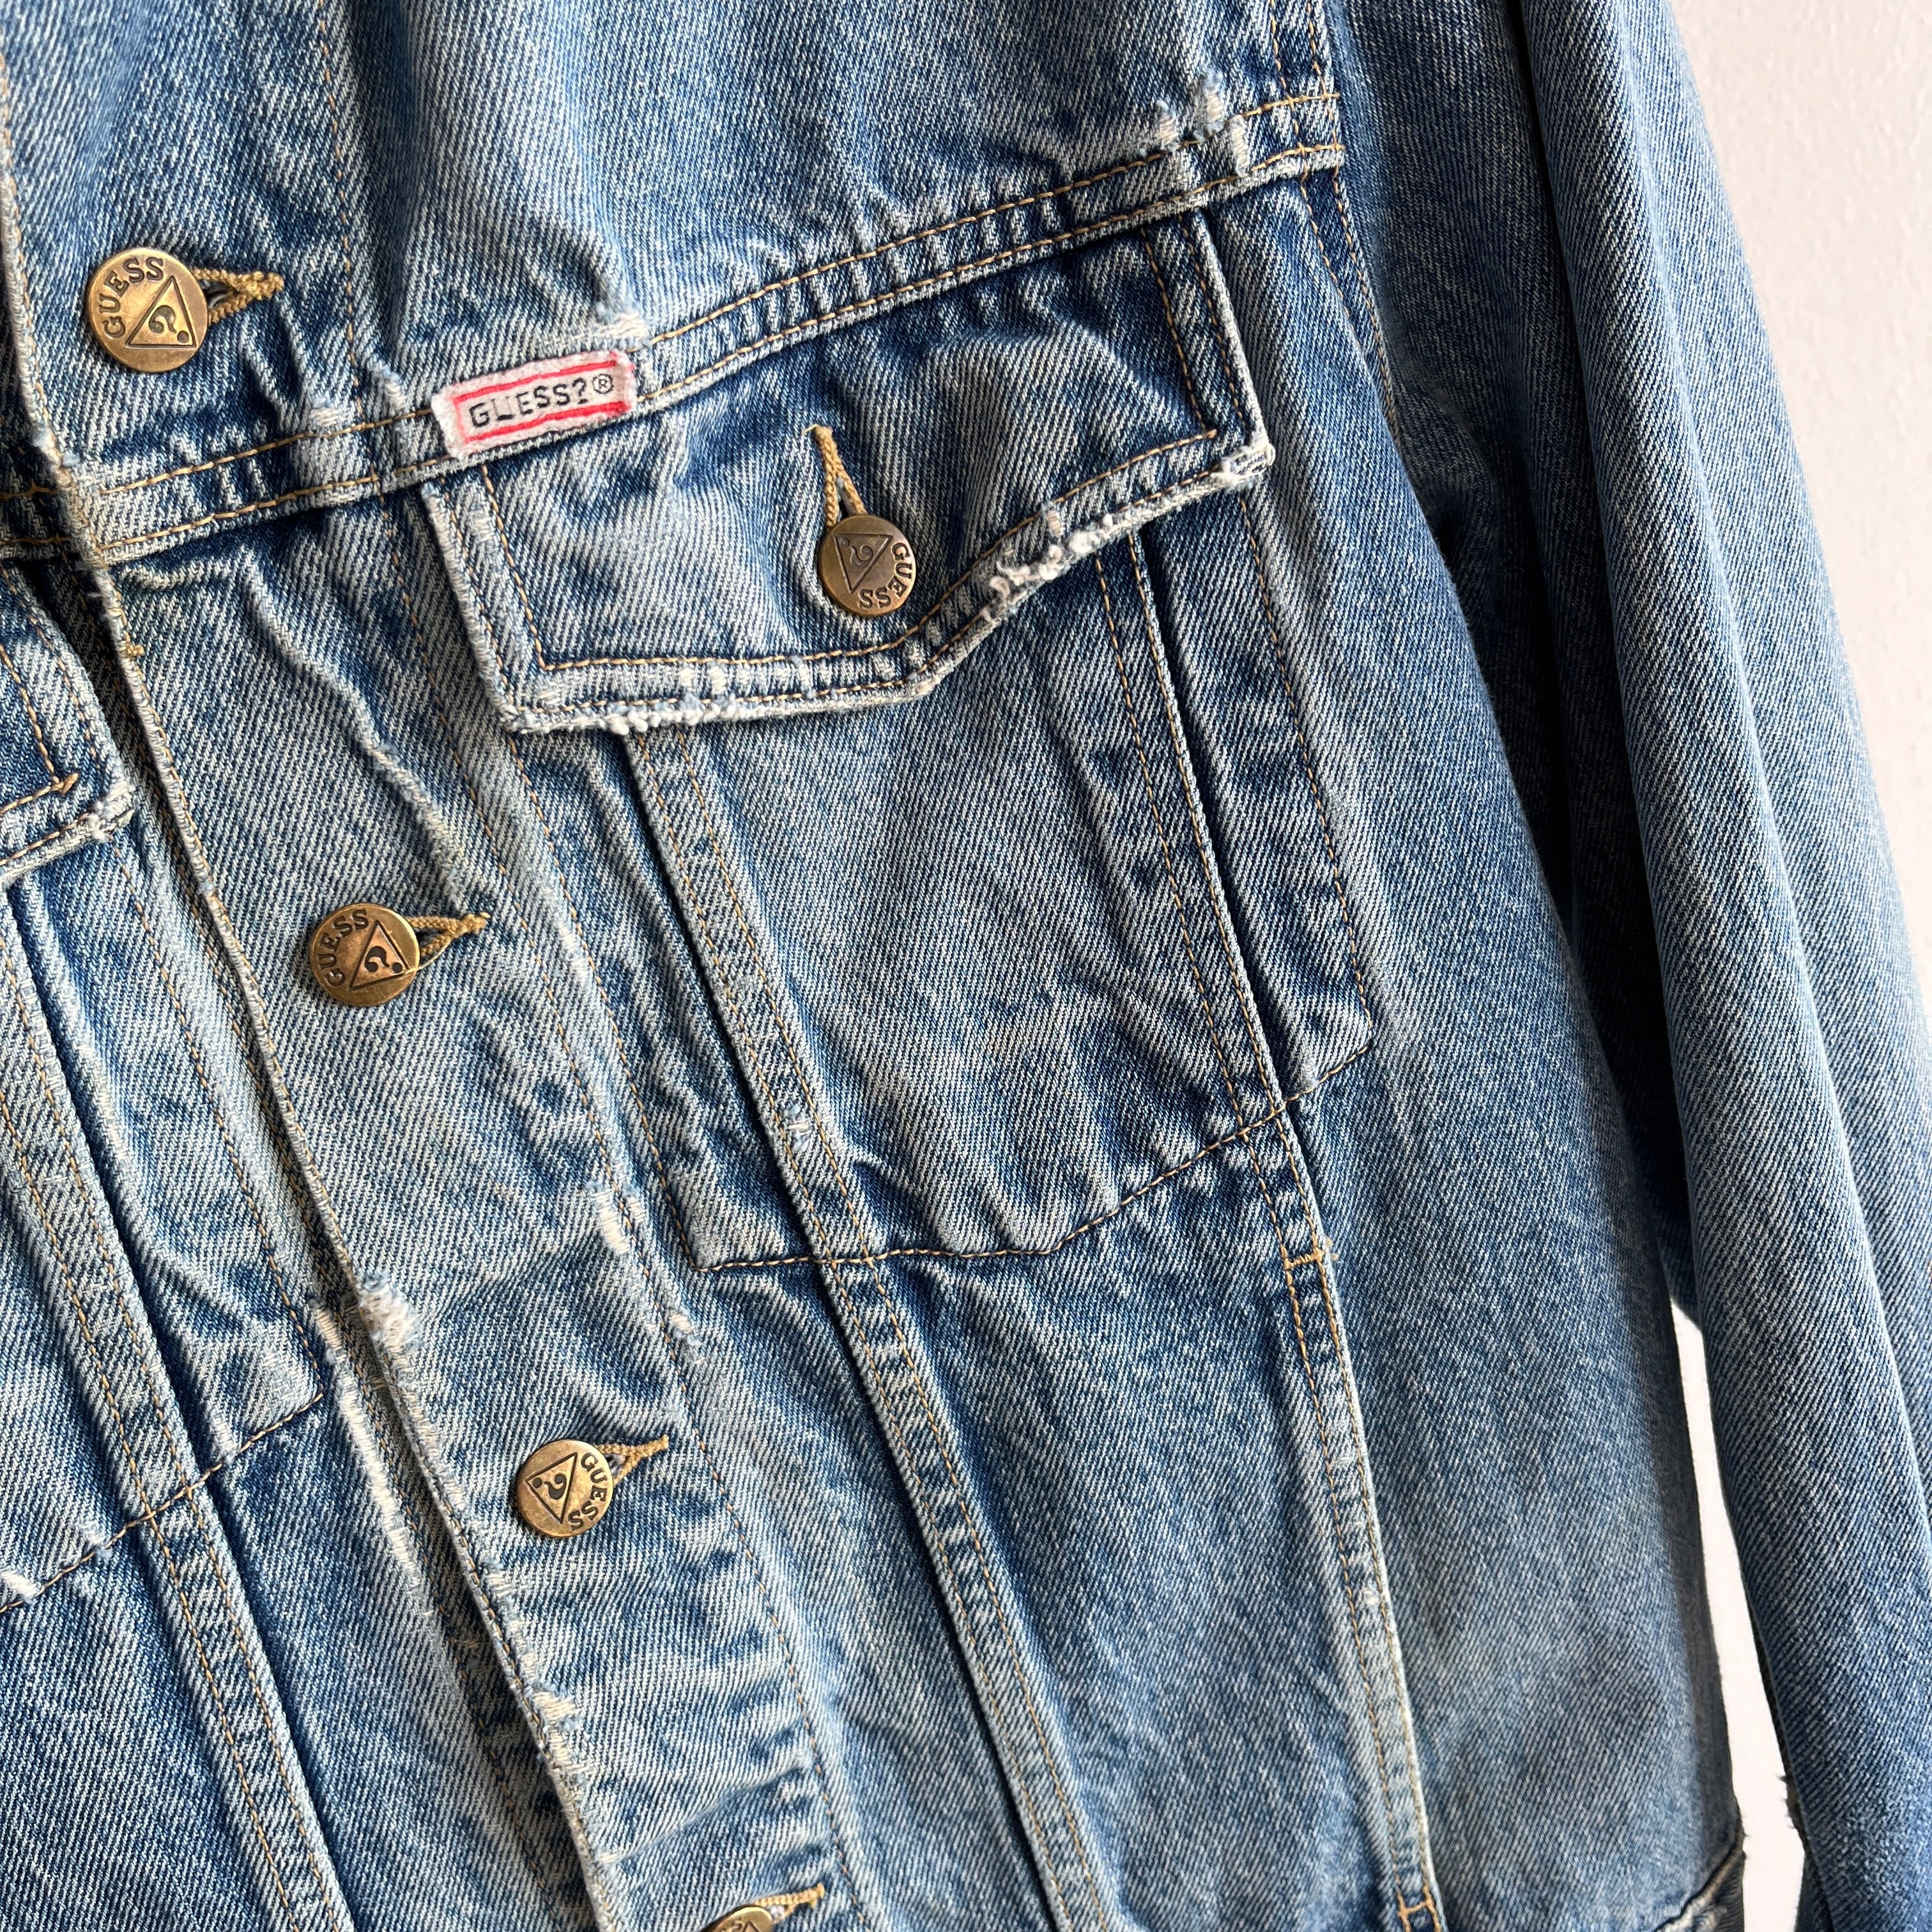 1980s Thrashed Guess Jeans Denim Jacket - USA Made